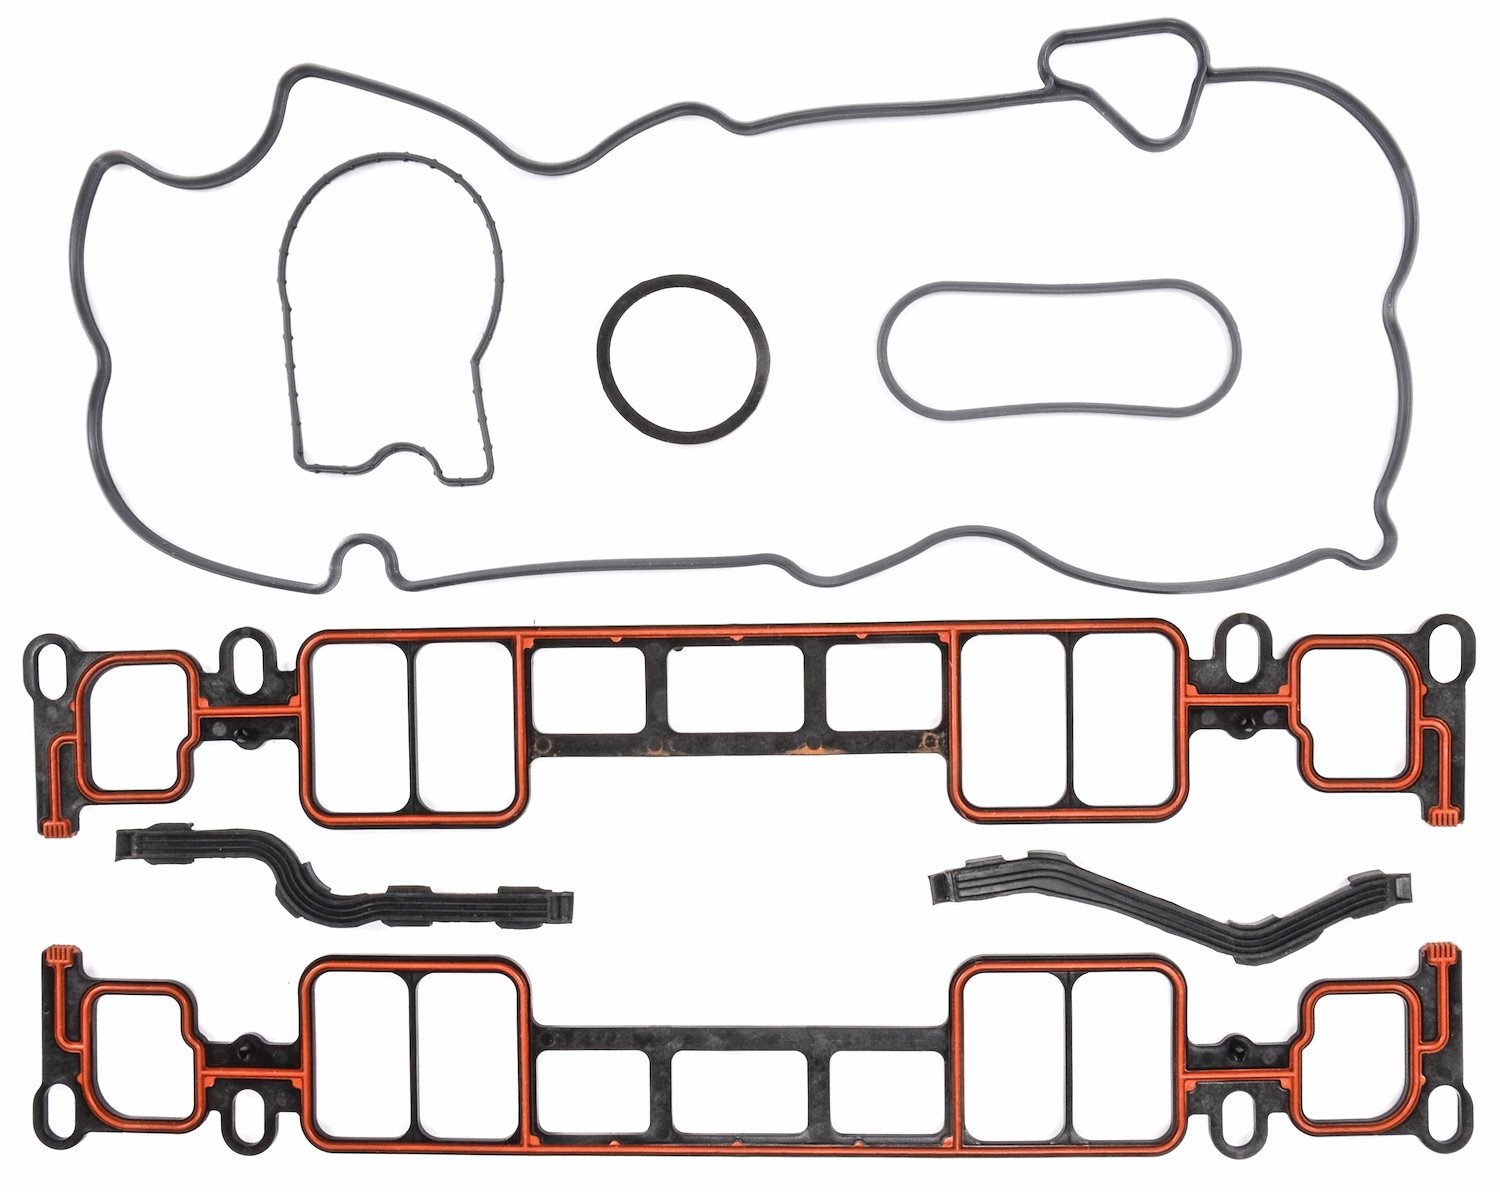 Intake Manifold Gasket Set for 1996-2002 Small Block Chevy V8 305 and 350 Vortec Engines